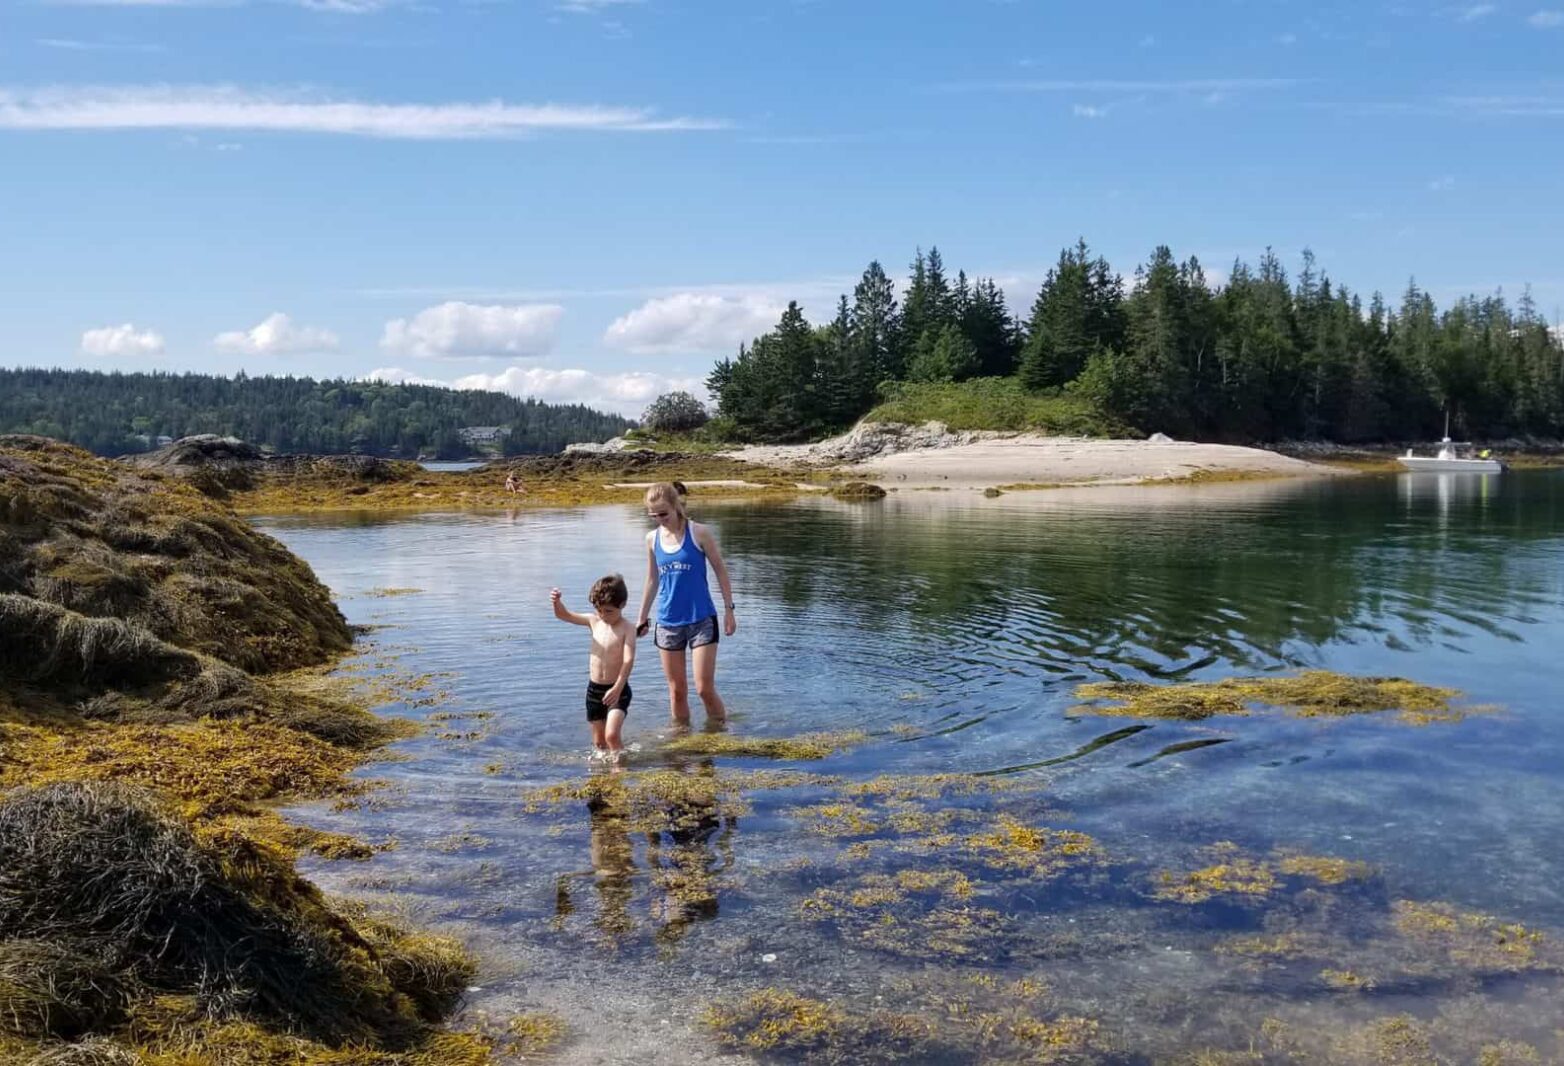 Kids wading in shallow water among seaweed-covered rocks.